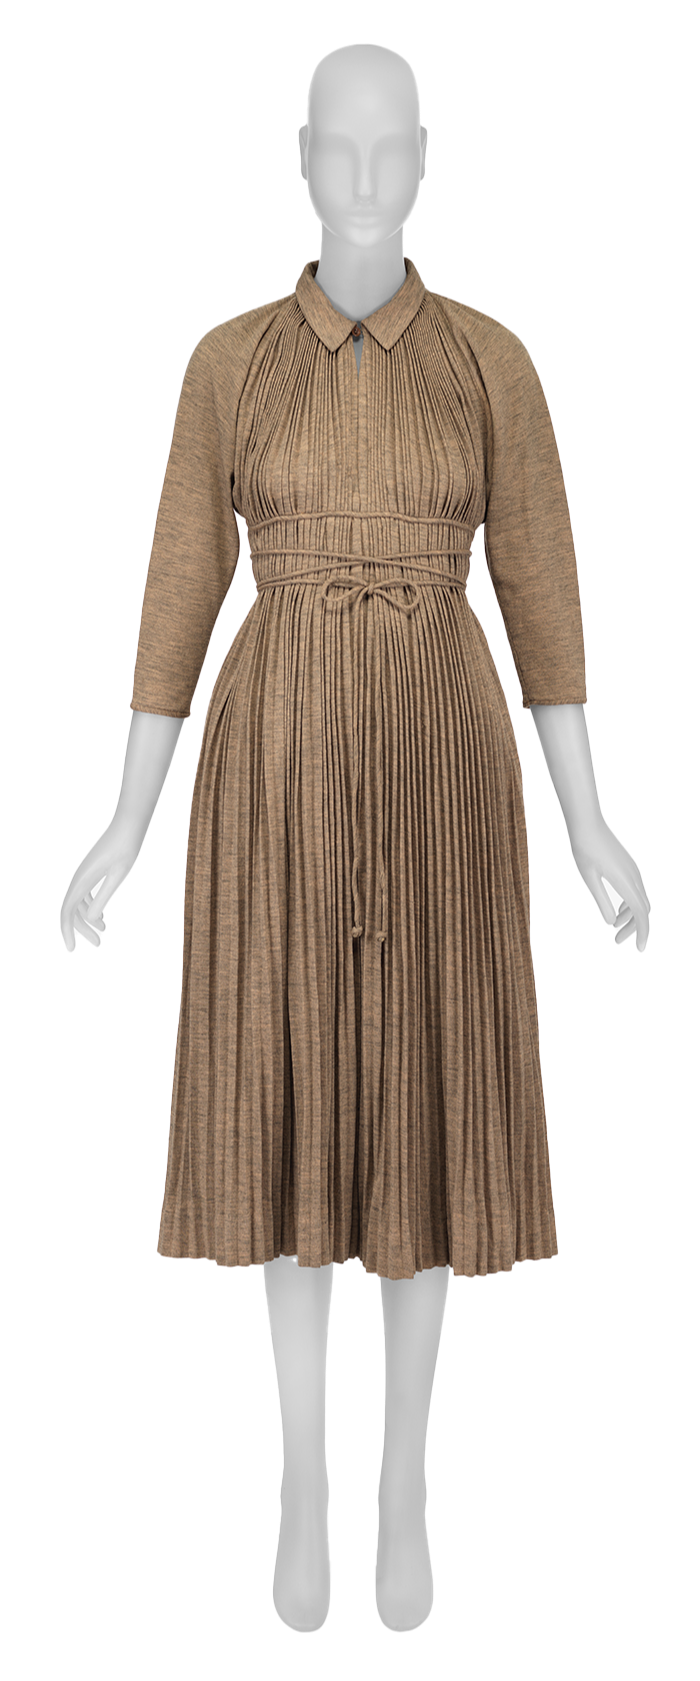 A gold-brown pleated dress with a tie at the waist